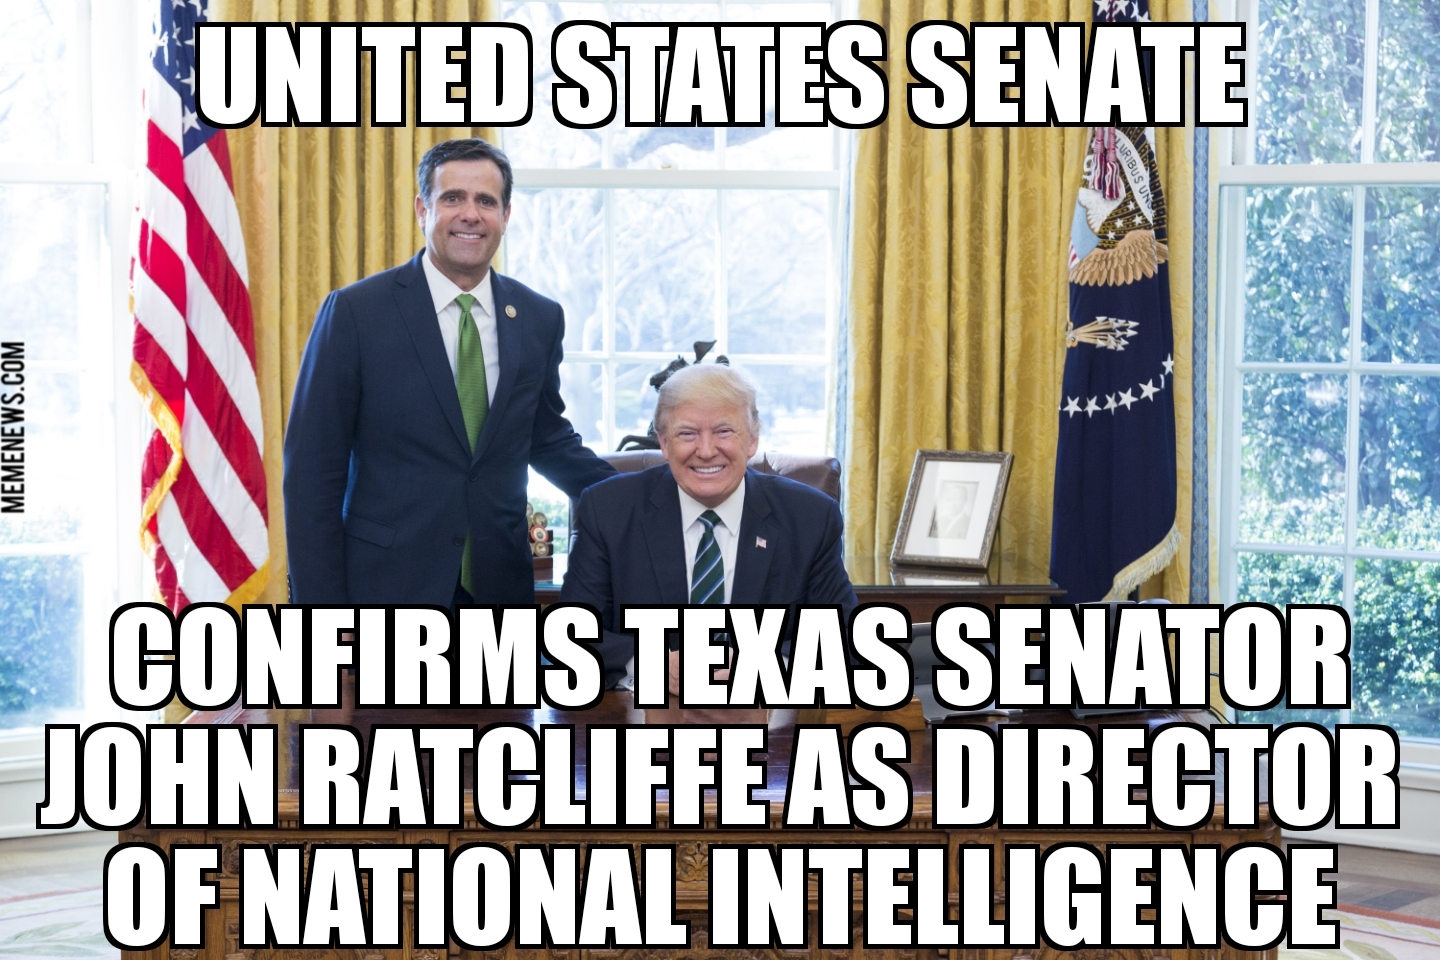 John Ratcliffe confirmed as Director of National Intelligence